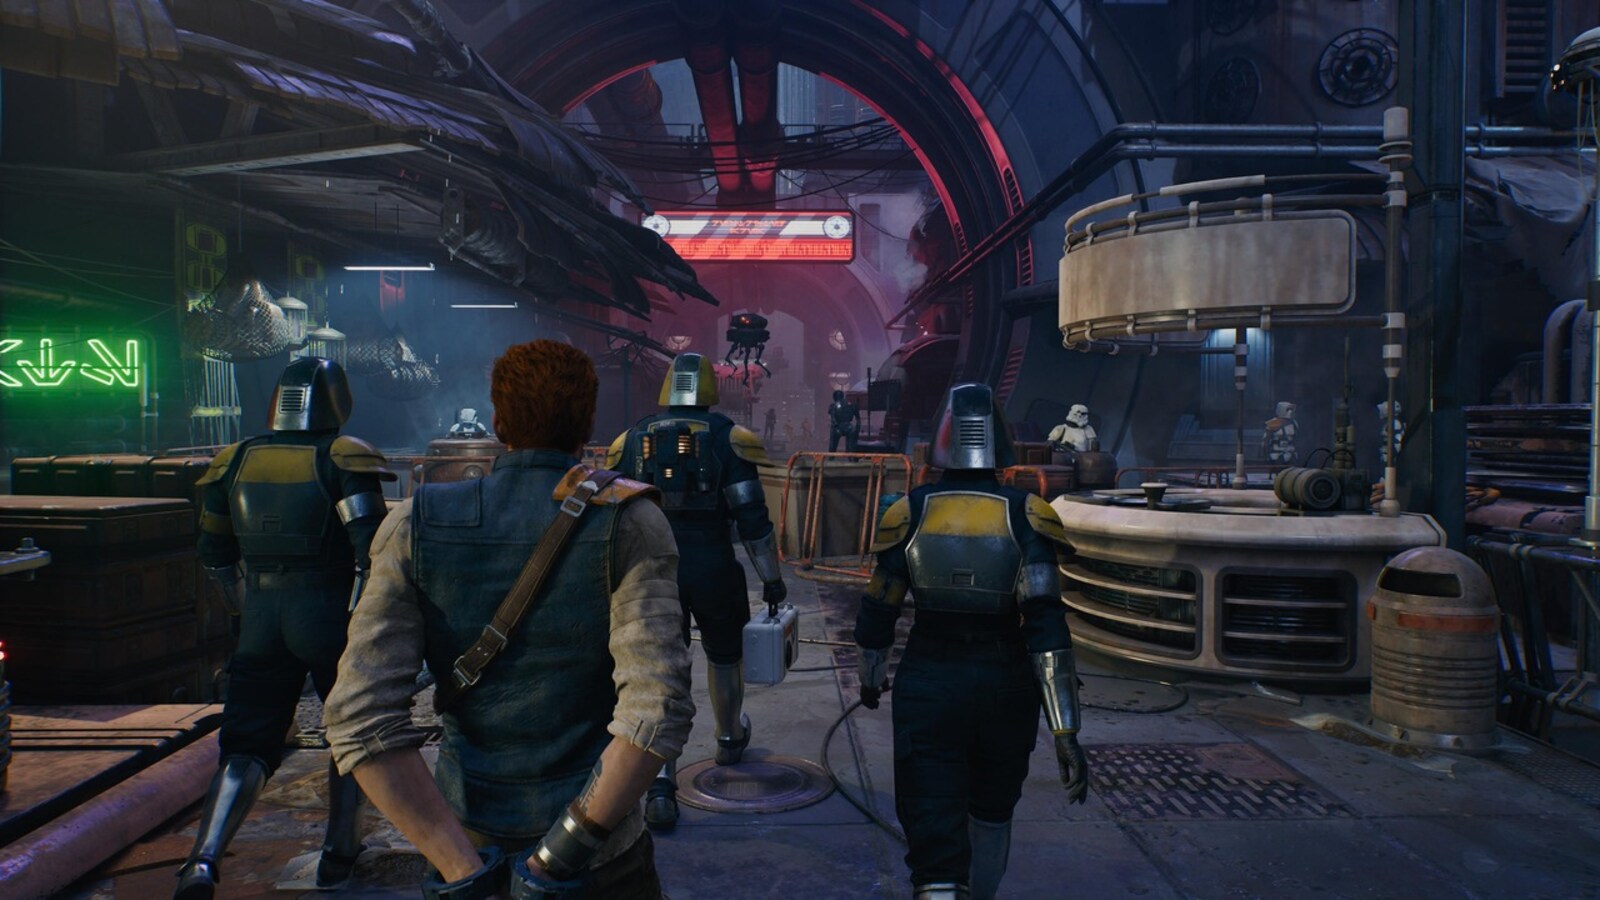 Star Wars Jedi: Survivor release date: PS5, Xbox Series X/S, and Windows PC  users must know these details about the video game - The Economic Times